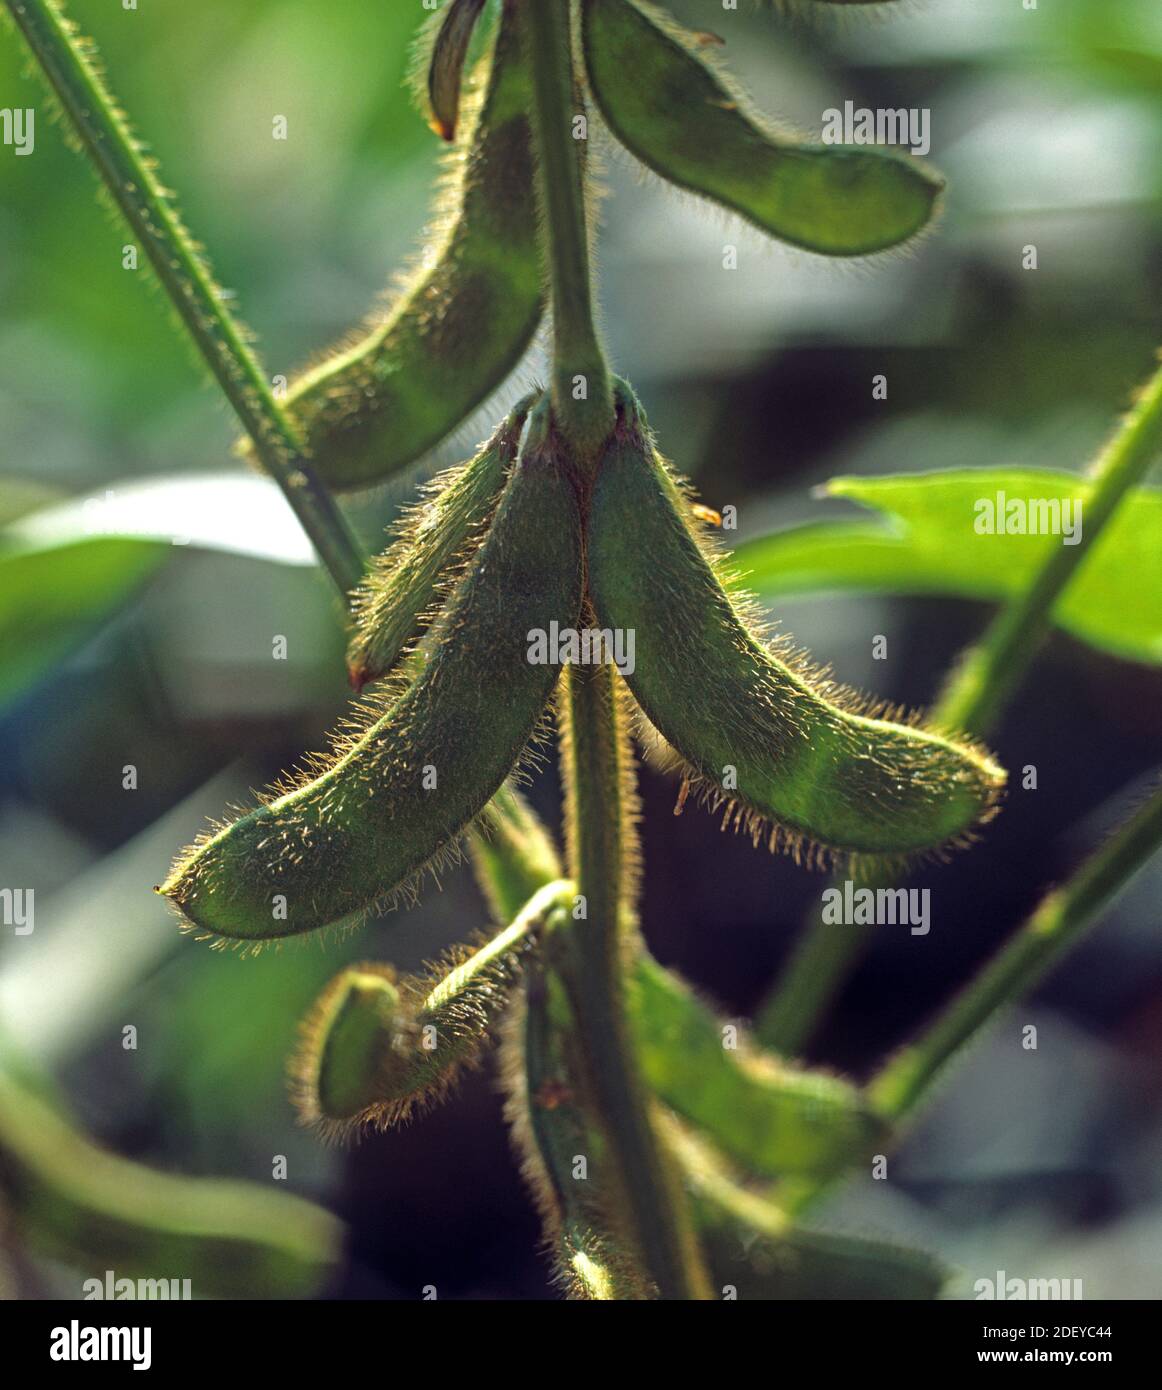 Mature unripe green soybean (Glycine max) pods with hairs back lit by low sunlight in a crop, Thailand Stock Photo